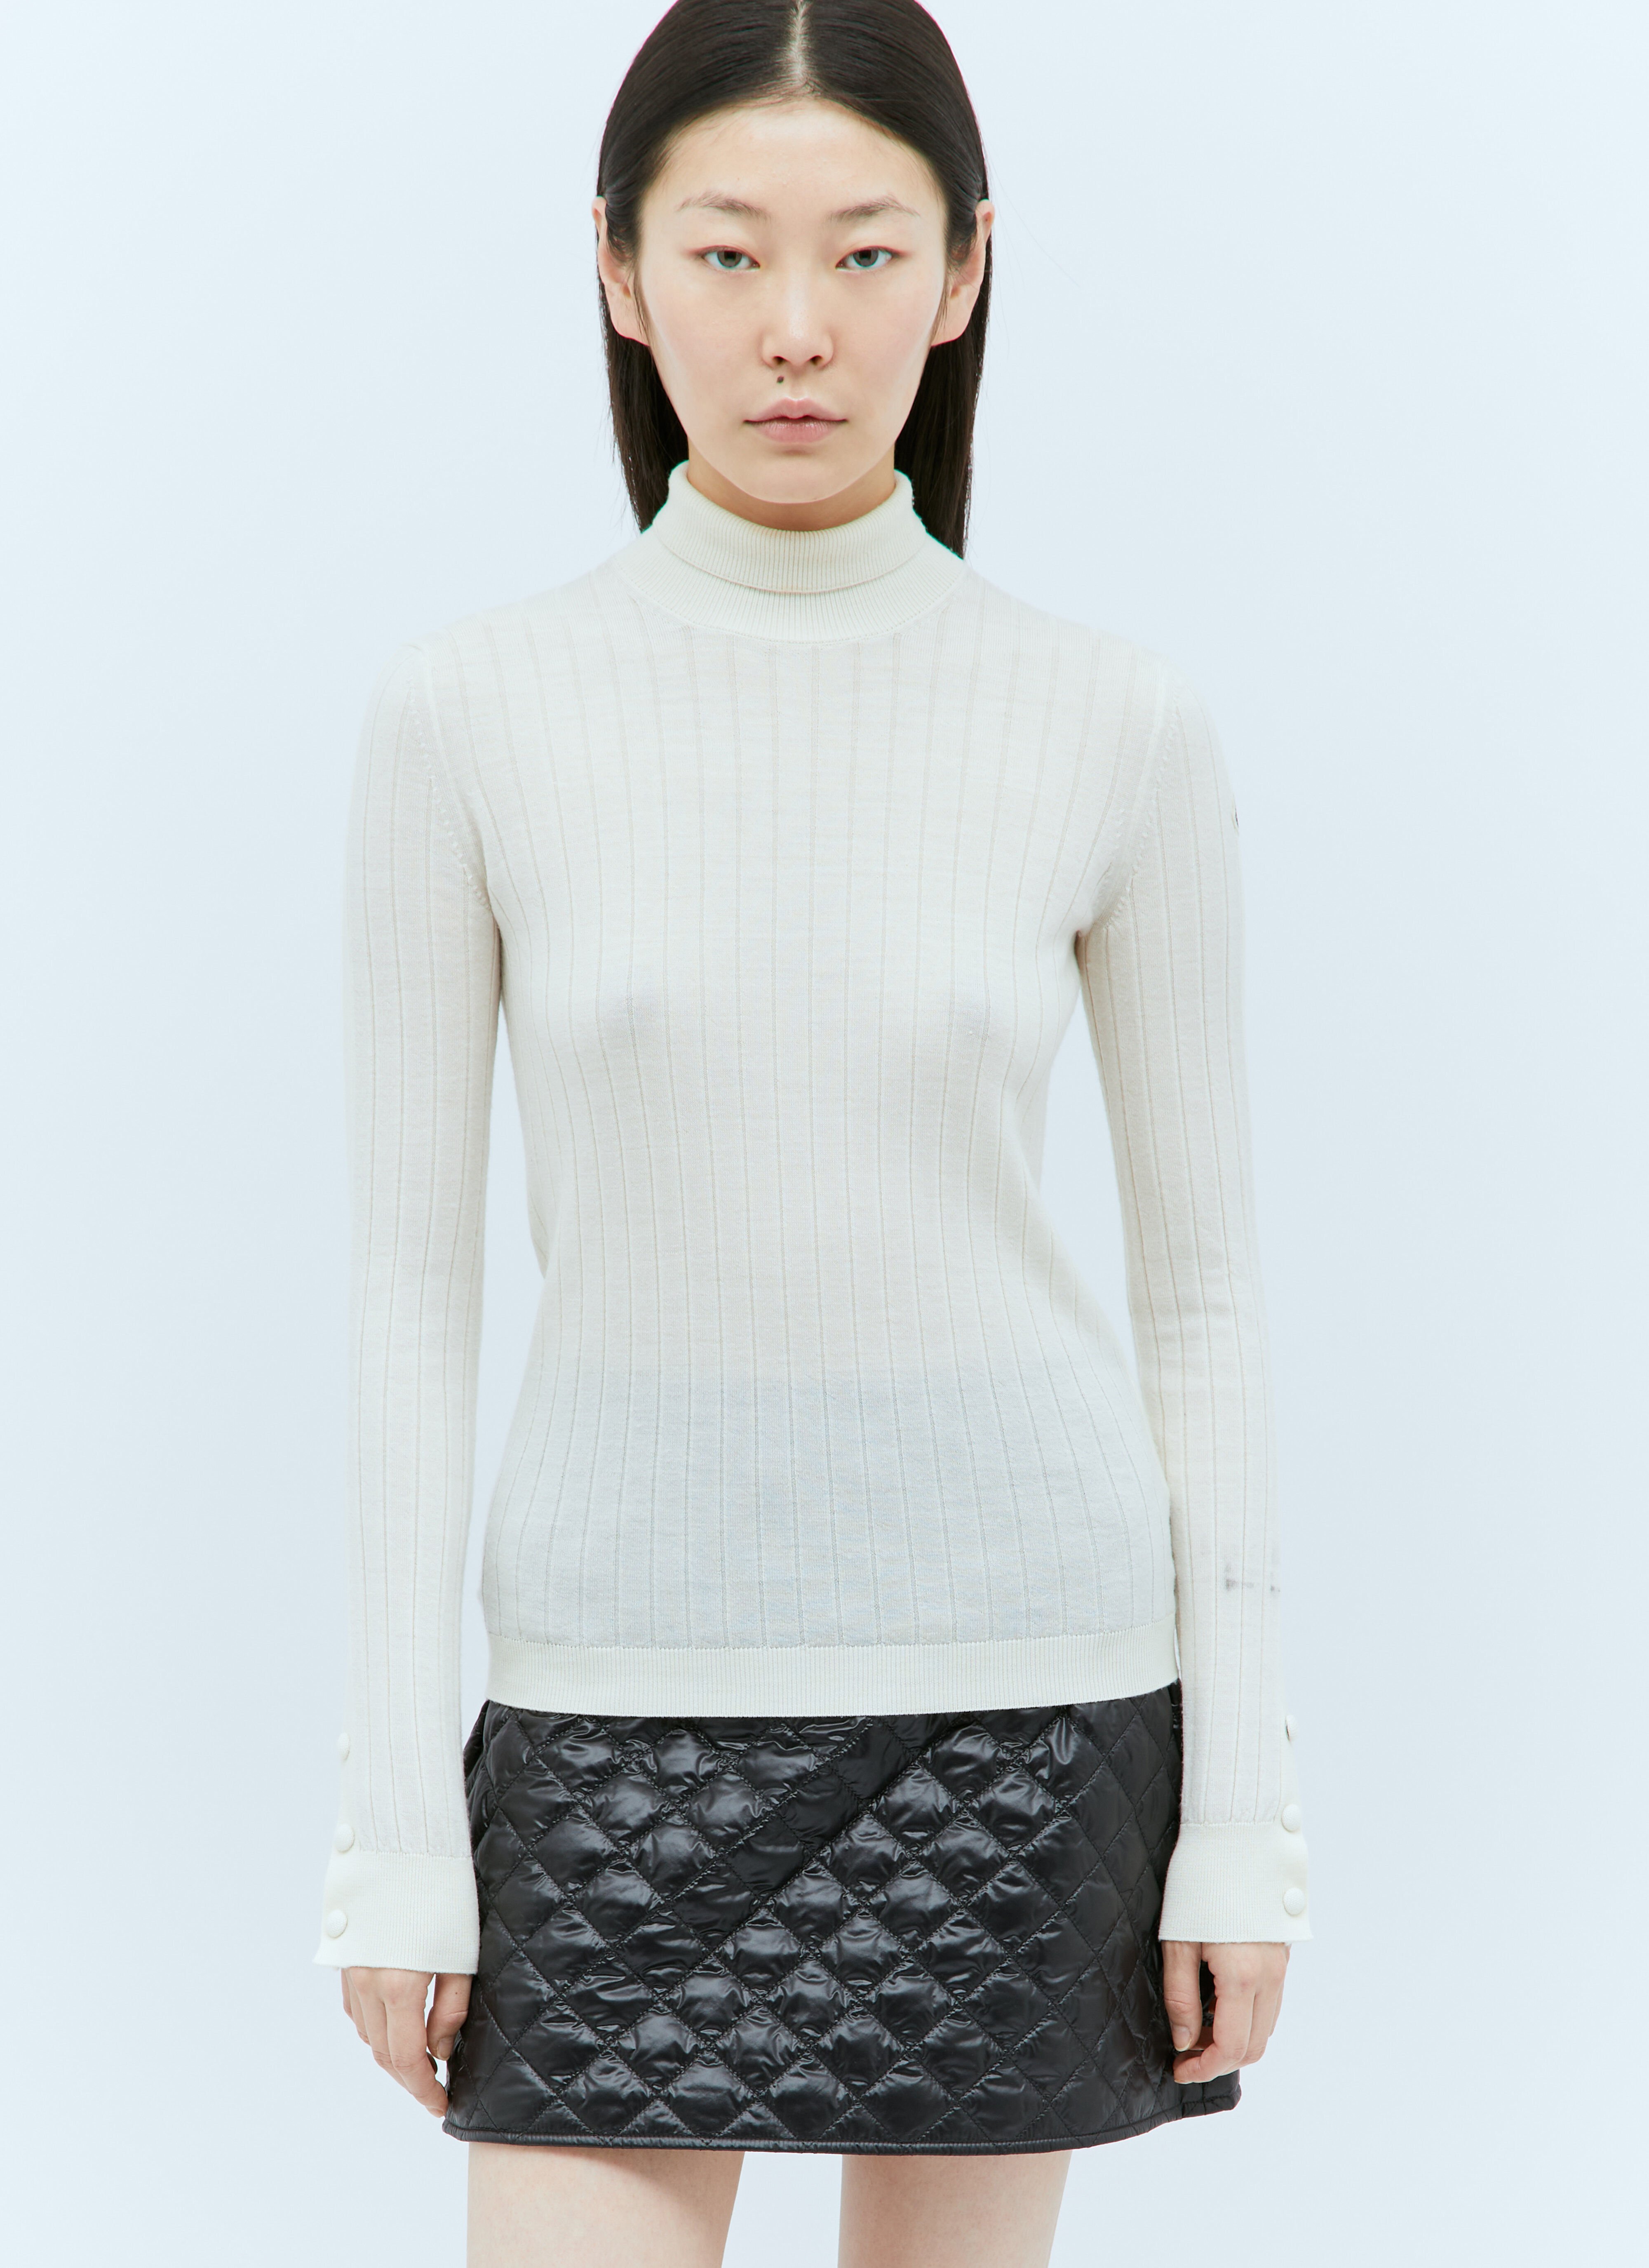 Jean Paul Gaultier Wool And Cashmere Sweater Gold jpg0358003